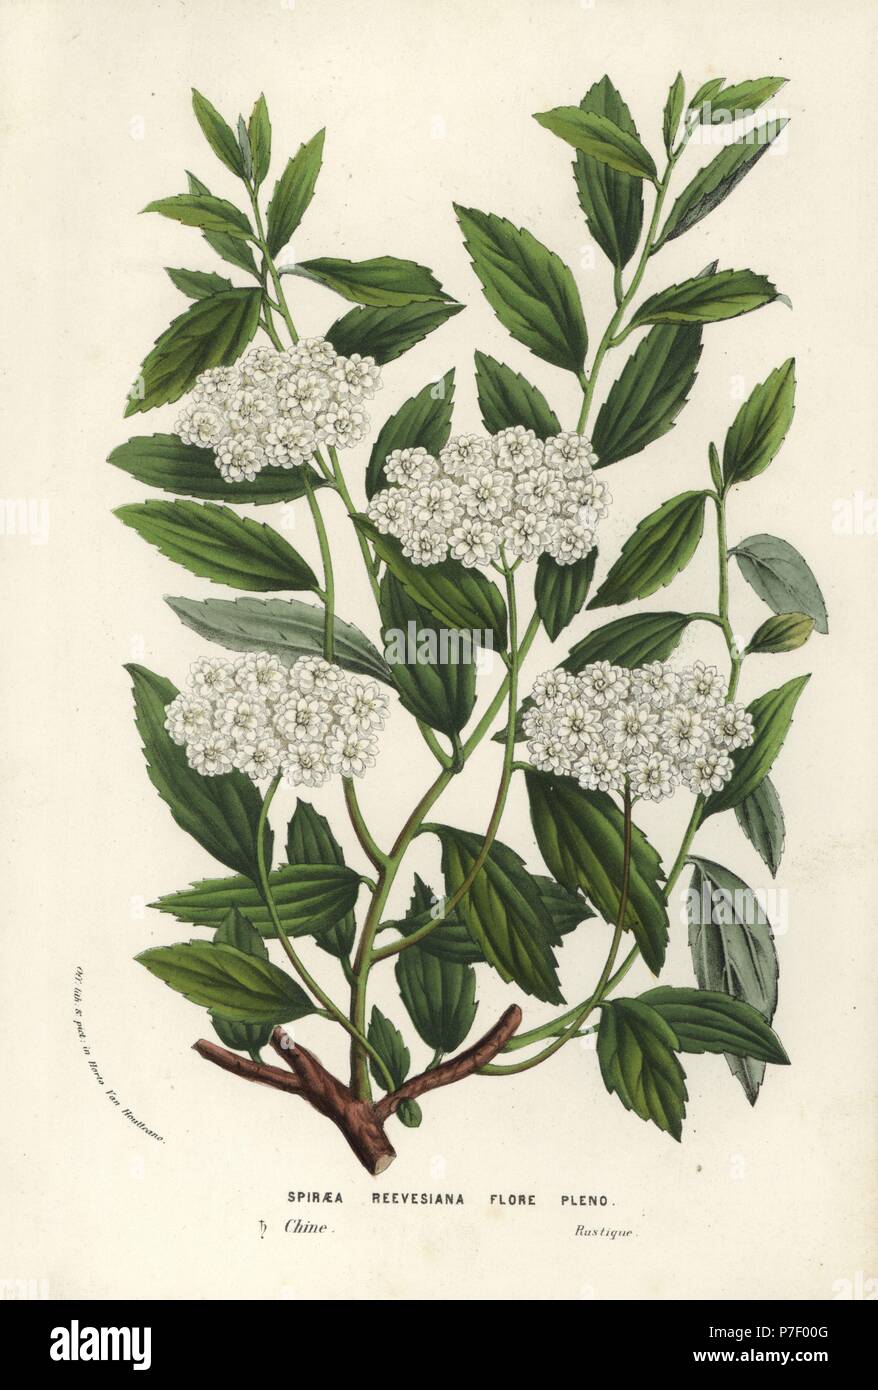 Reeve's spiraea, Spiraea cantoniensis f. lanceata (Spiraea reevesiana florepleno). China. Handcoloured lithograph from Louis van Houtte and Charles Lemaire's Flowers of the Gardens and Hothouses of Europe, Flore des Serres et des Jardins de l'Europe, Ghent, Belgium, 1856. Stock Photo